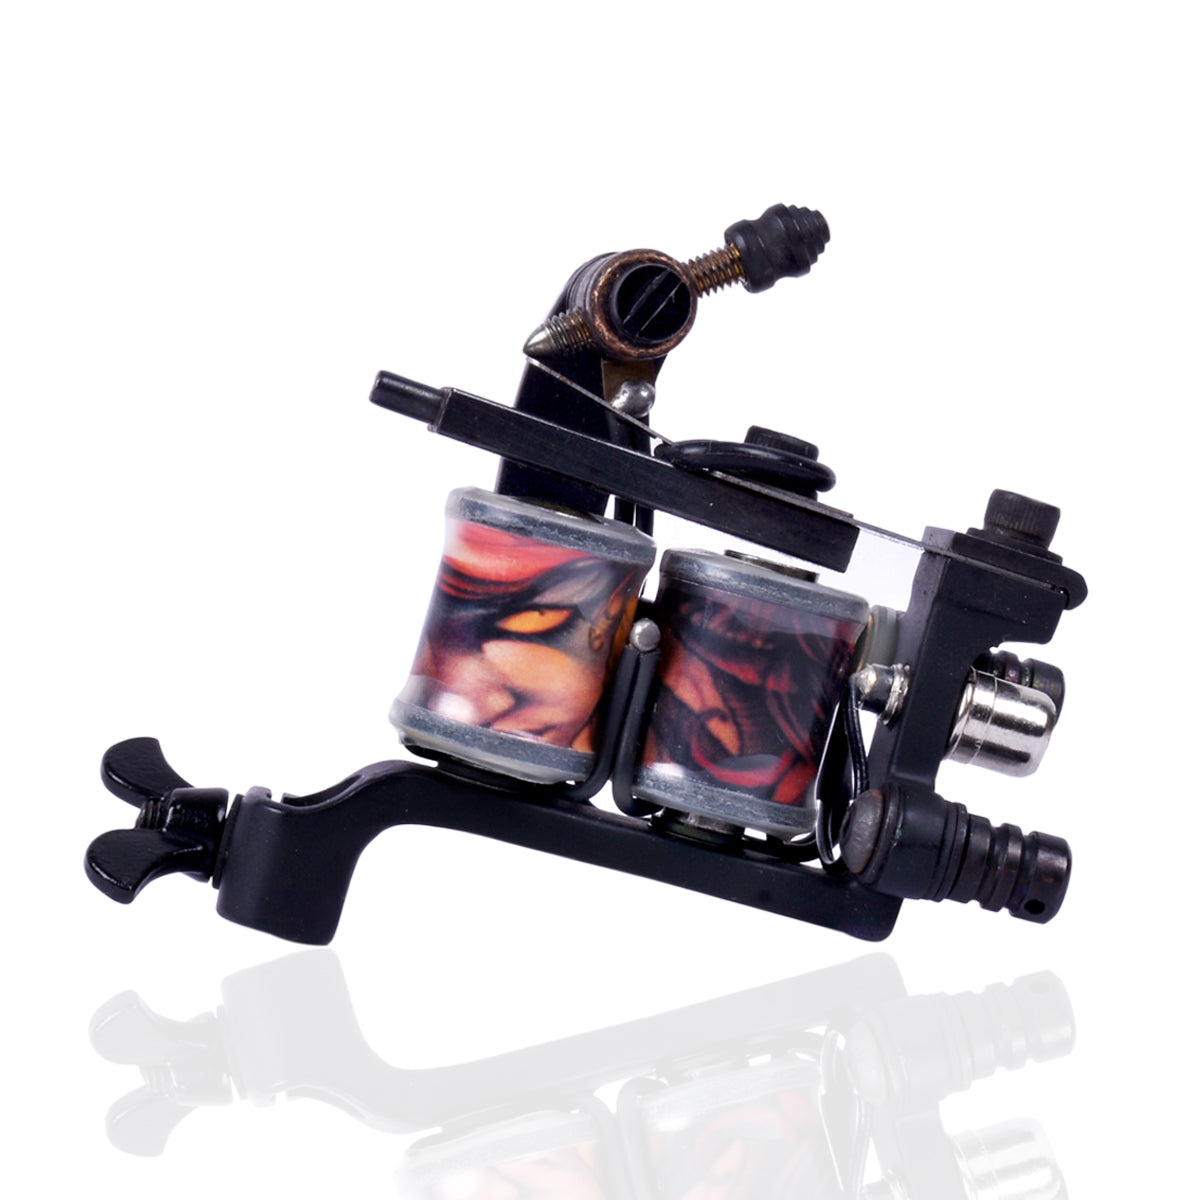 Buy Tattoo Machine Kit, CINRA Professional Tattoo Kit Tattoo Coils Machine  Gun Kit Tattoo Ink with Tattoo Power Supply Foot Pedal Needles for Lining  Shading Permanent Makeup Tattoo Machine SuppIies Online at